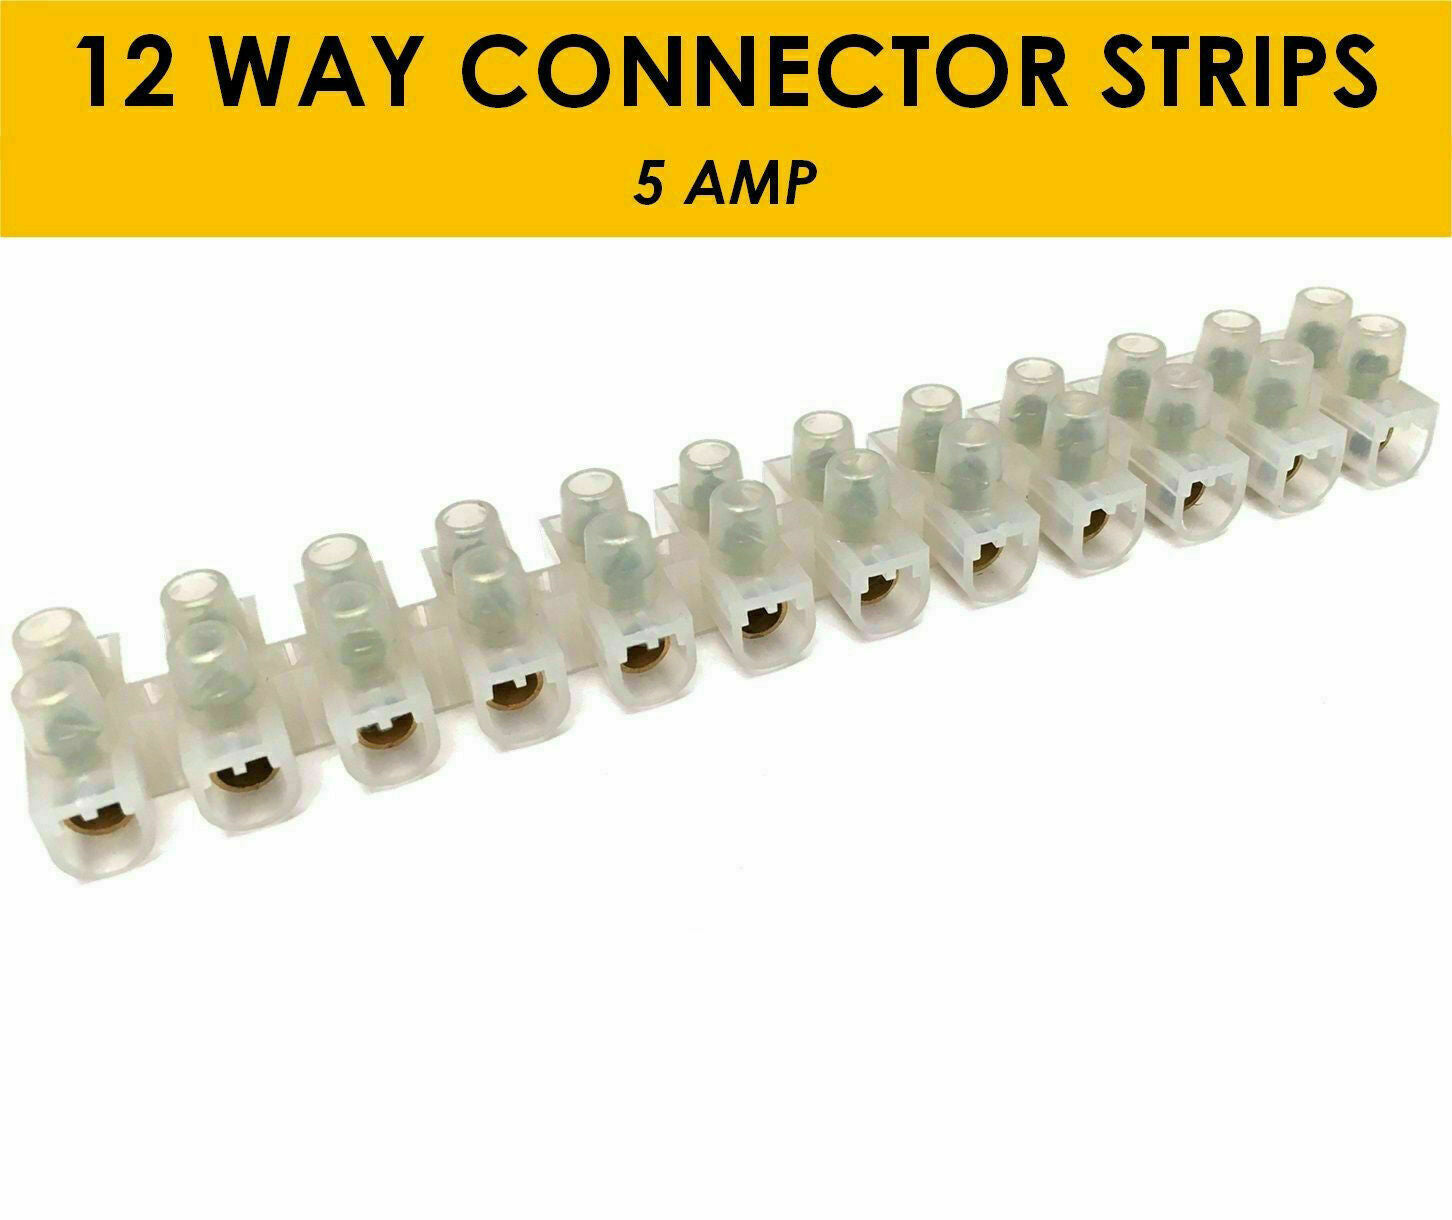 12 way connector strip electrical choc block wire terminal connection